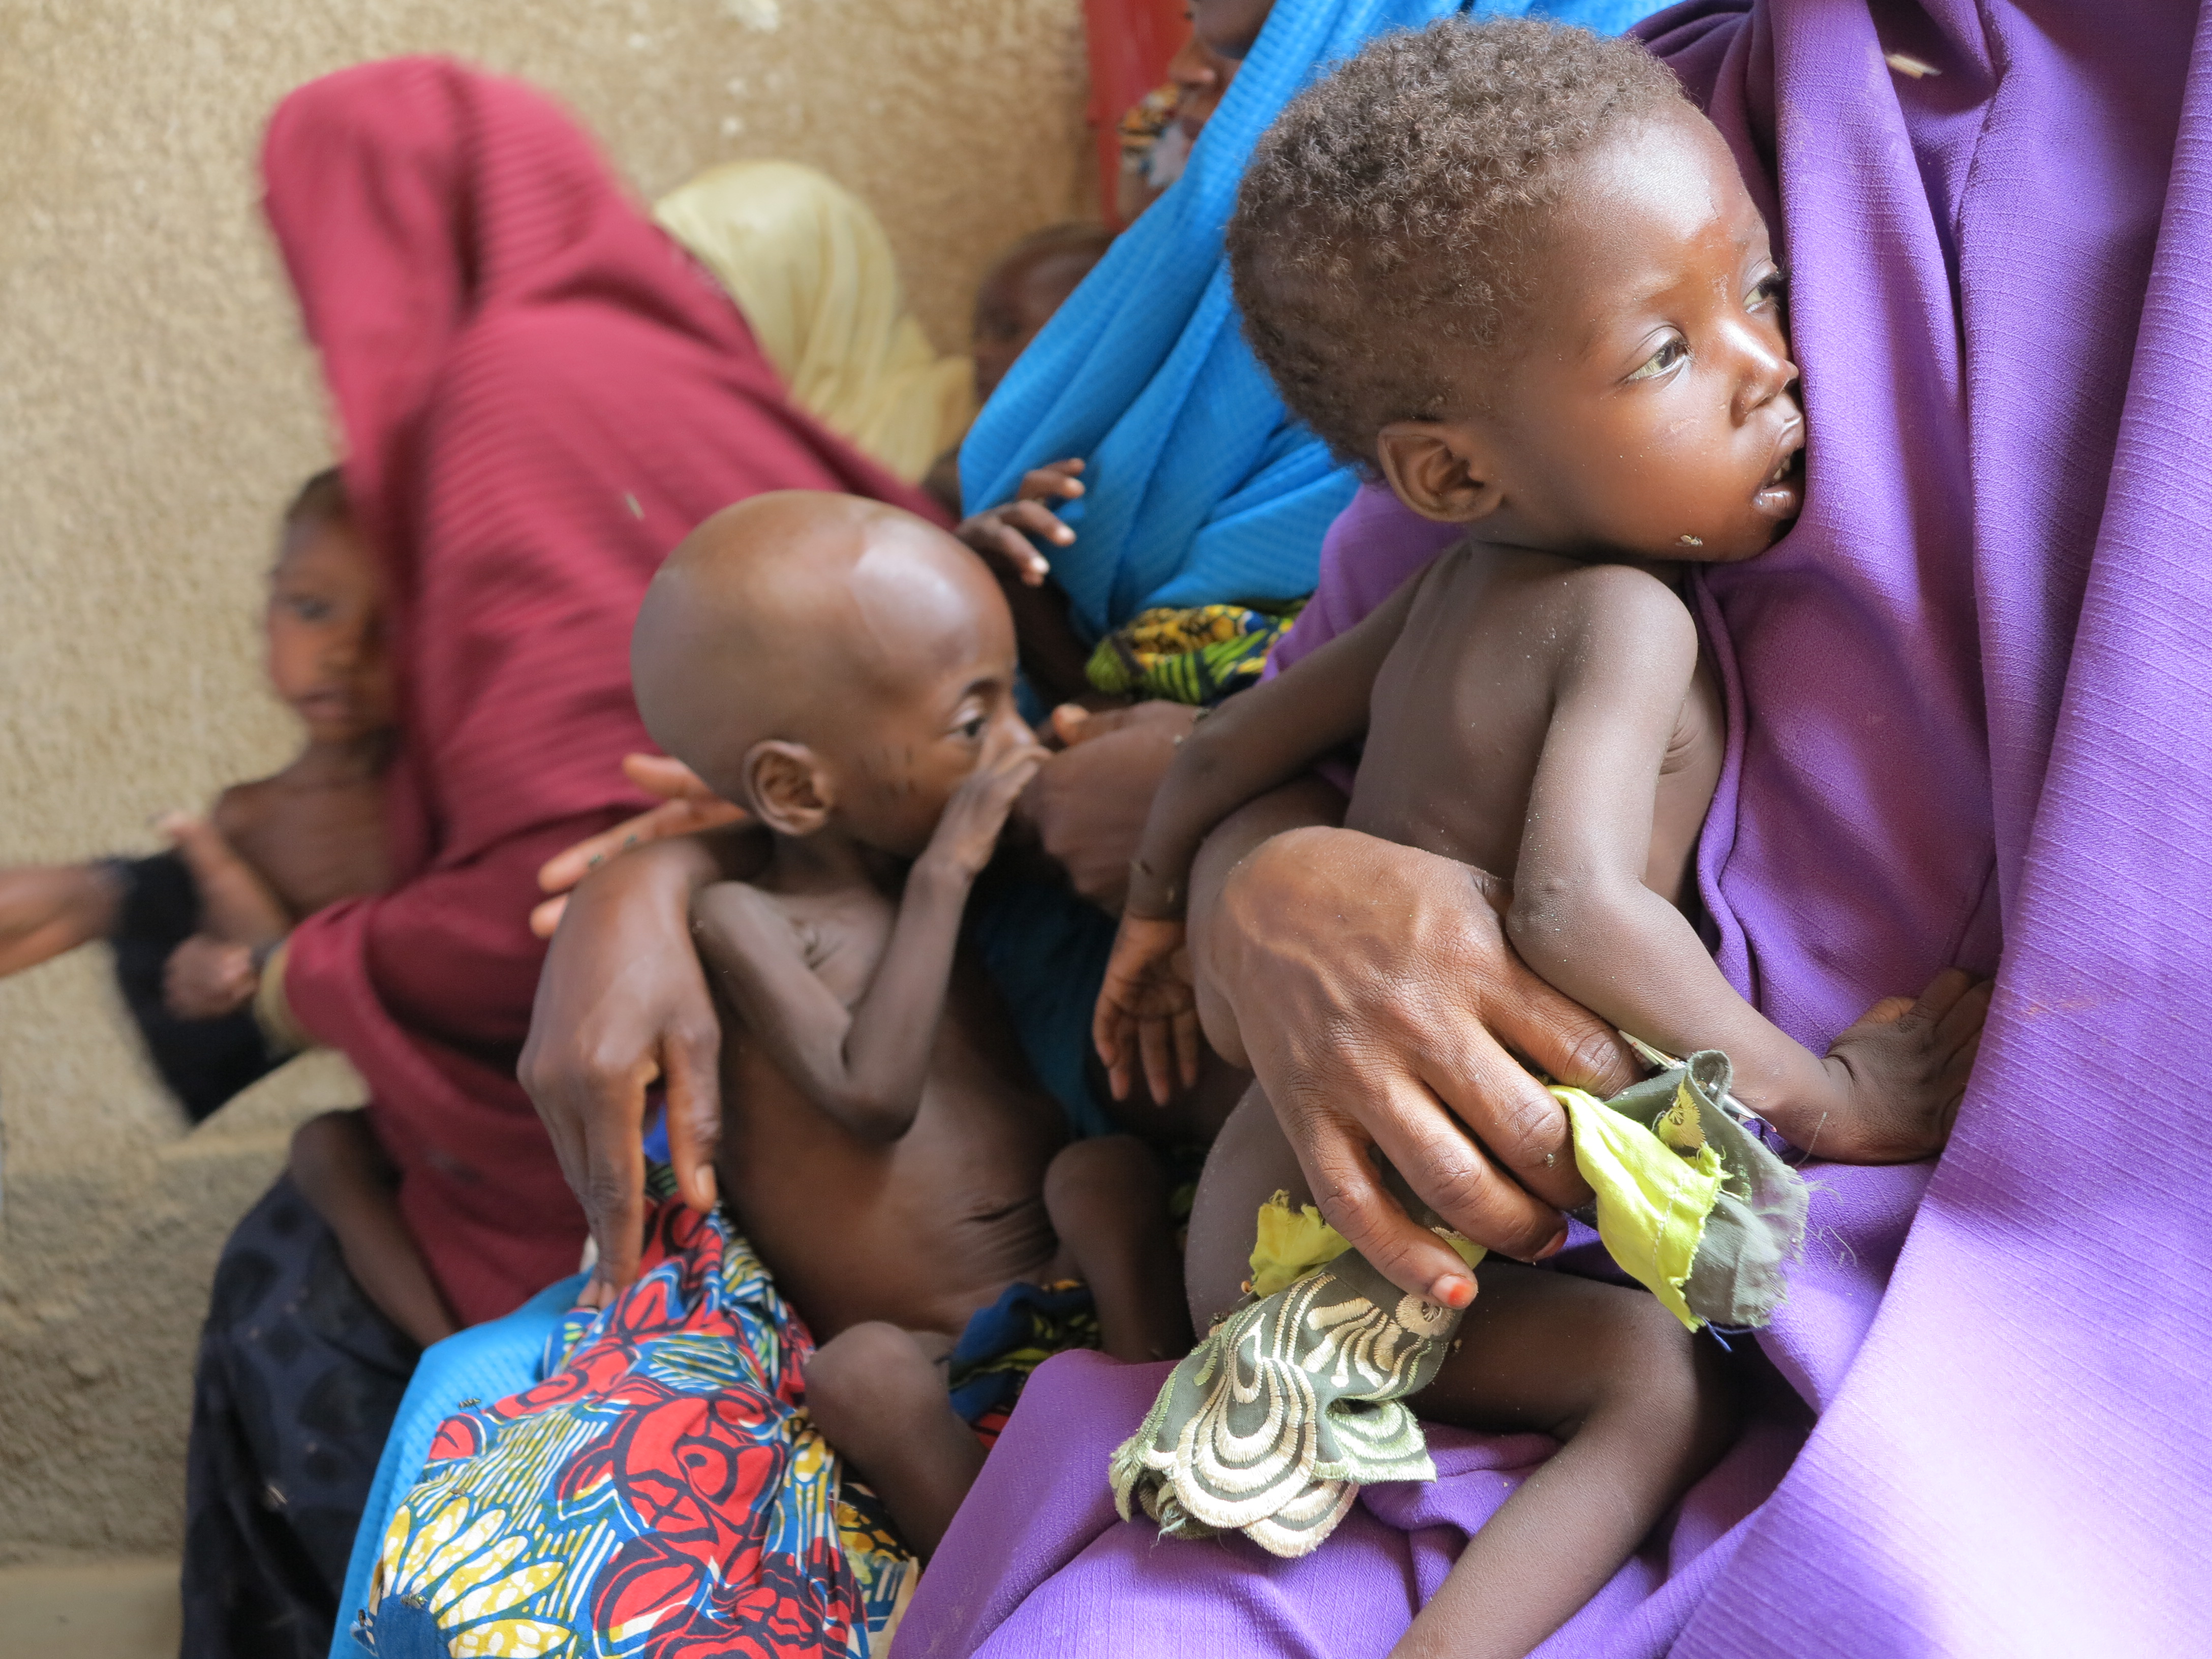 Yahya Abdumalik, a 14-month-old severely malnourished child held by his mother, Zayha Arouna, at a clinic in Madarounfa, a village in Niger near the Nigerian border on June 14, 2012 (The Washington Post—Getty Images)